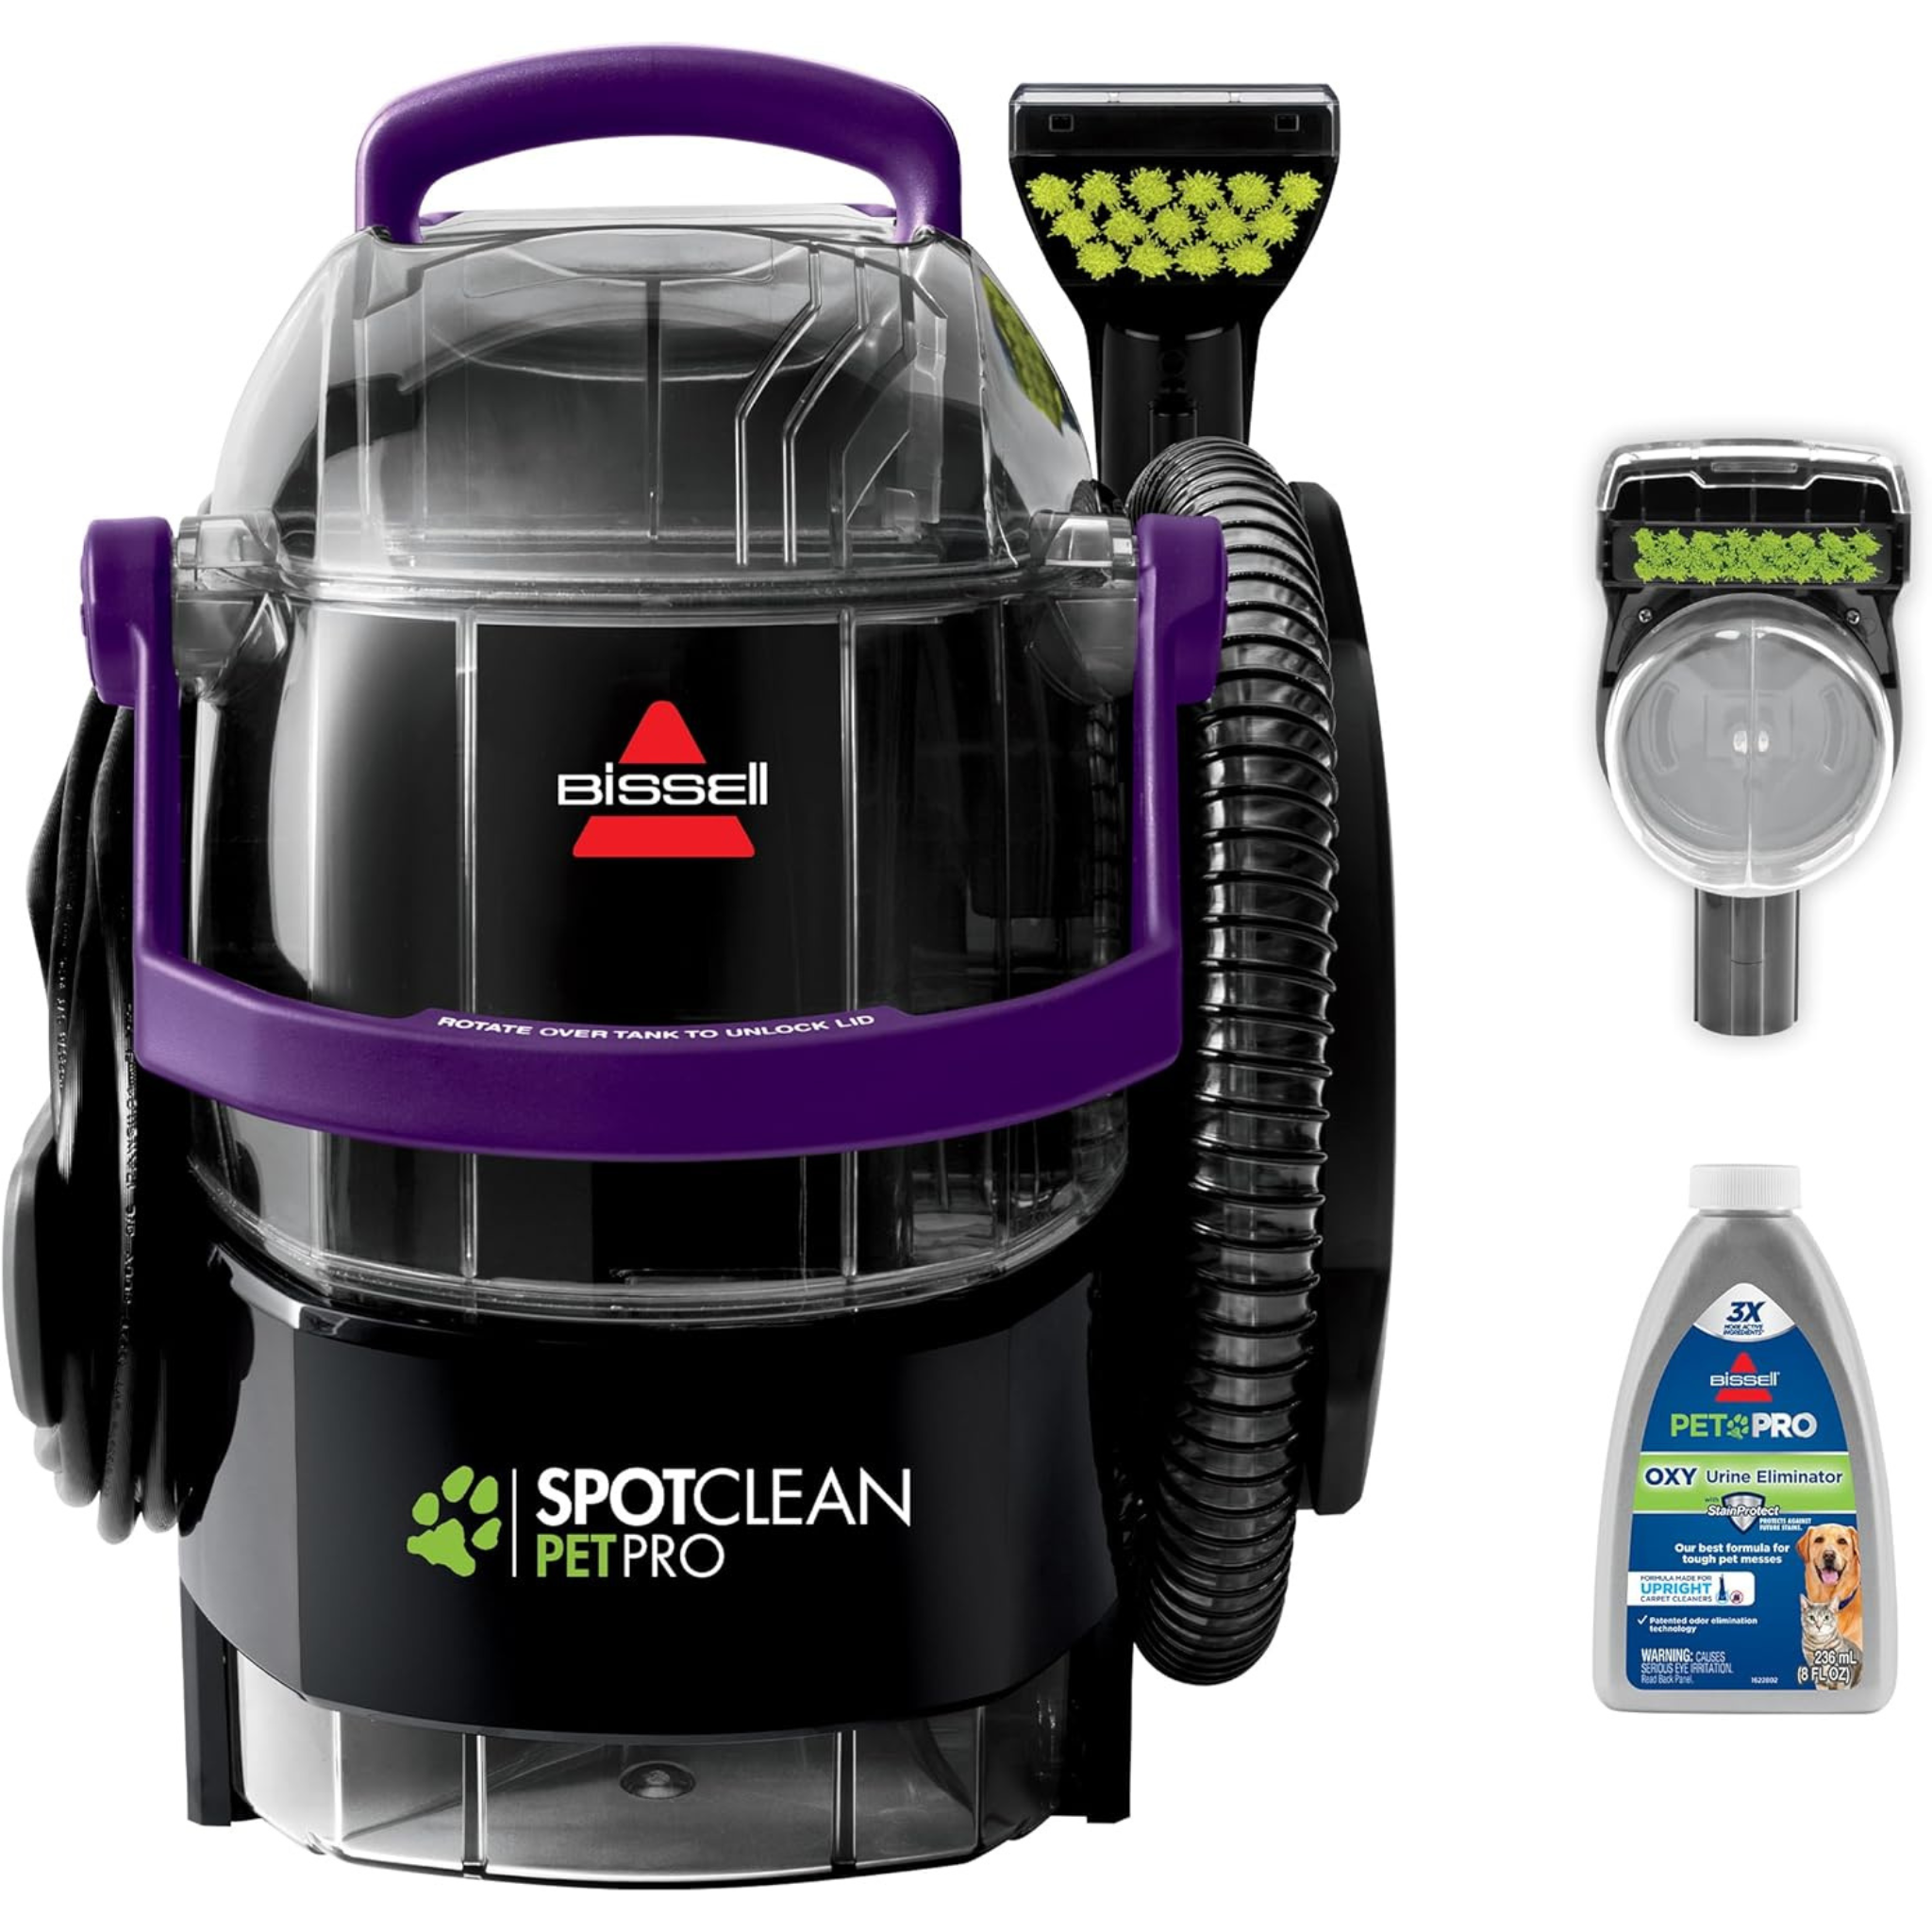 Bissell SpotClean Pet Pro Portable Compact Carpet Cleaner